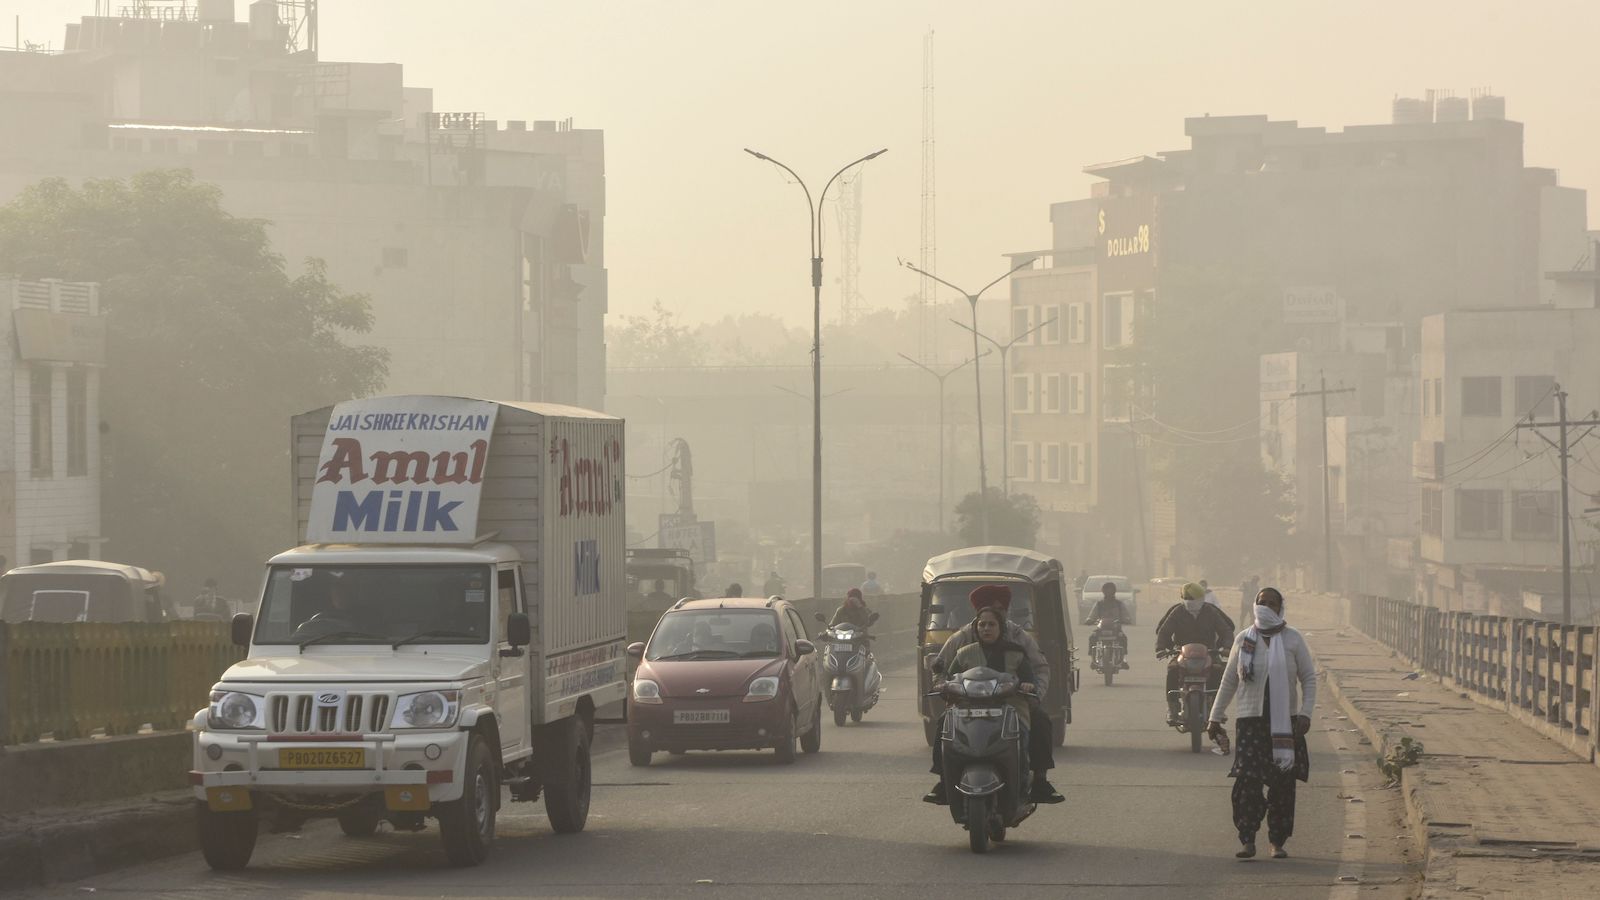 A smoggy sky in Amritsar, India.